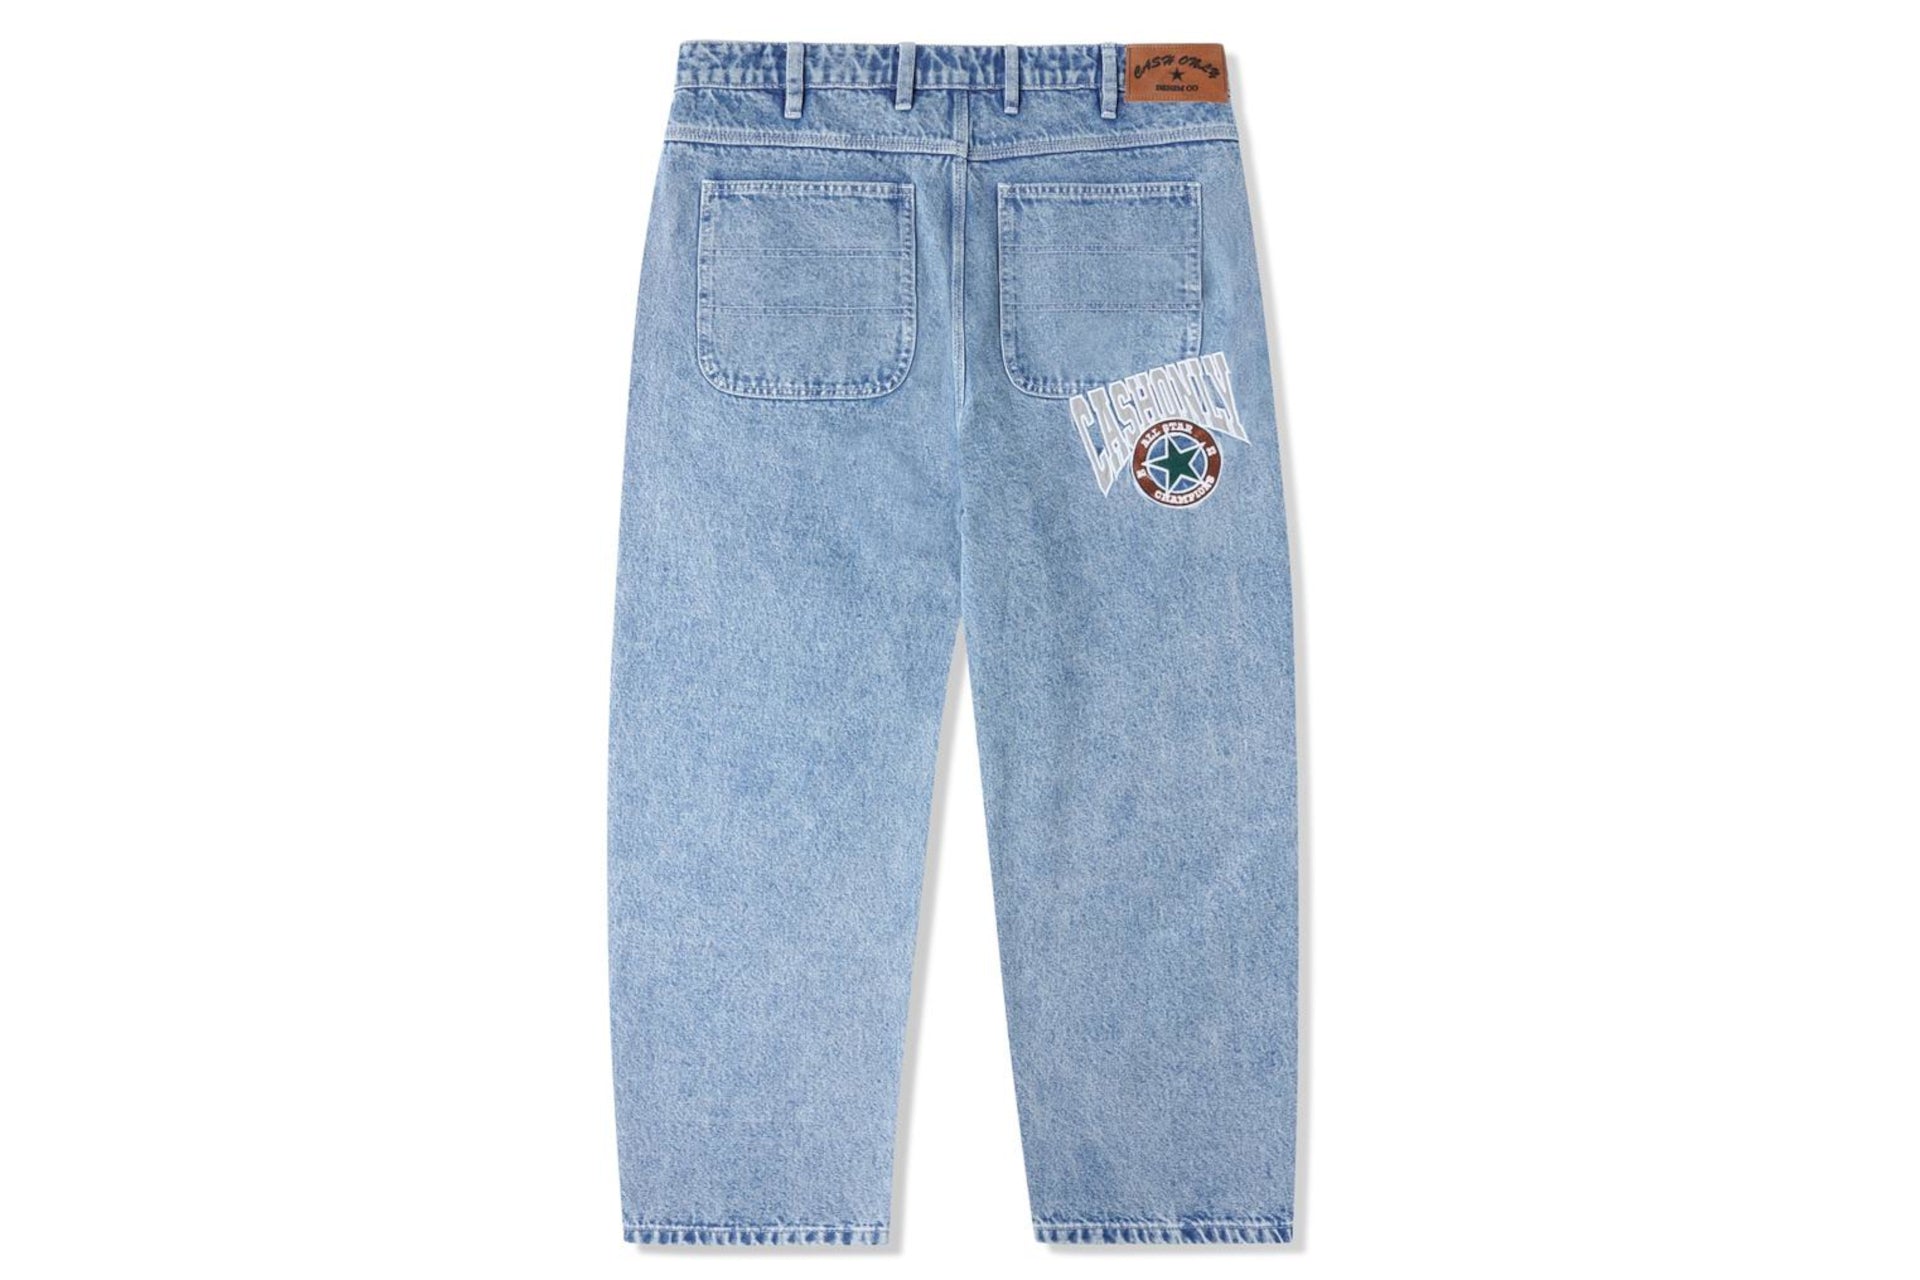 All Star Baggy Jeans - Faded Indigo